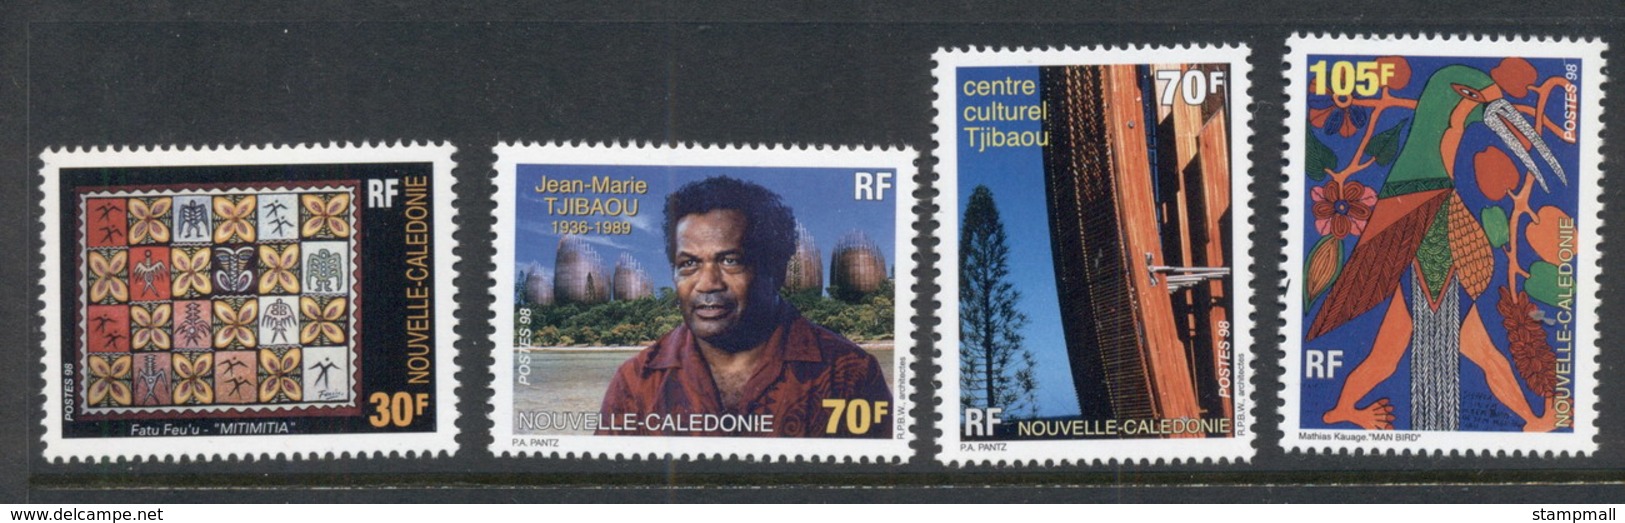 New Caledonia 1998 Jean Marie Tjibaou Cultural Centre MUH - Unused Stamps